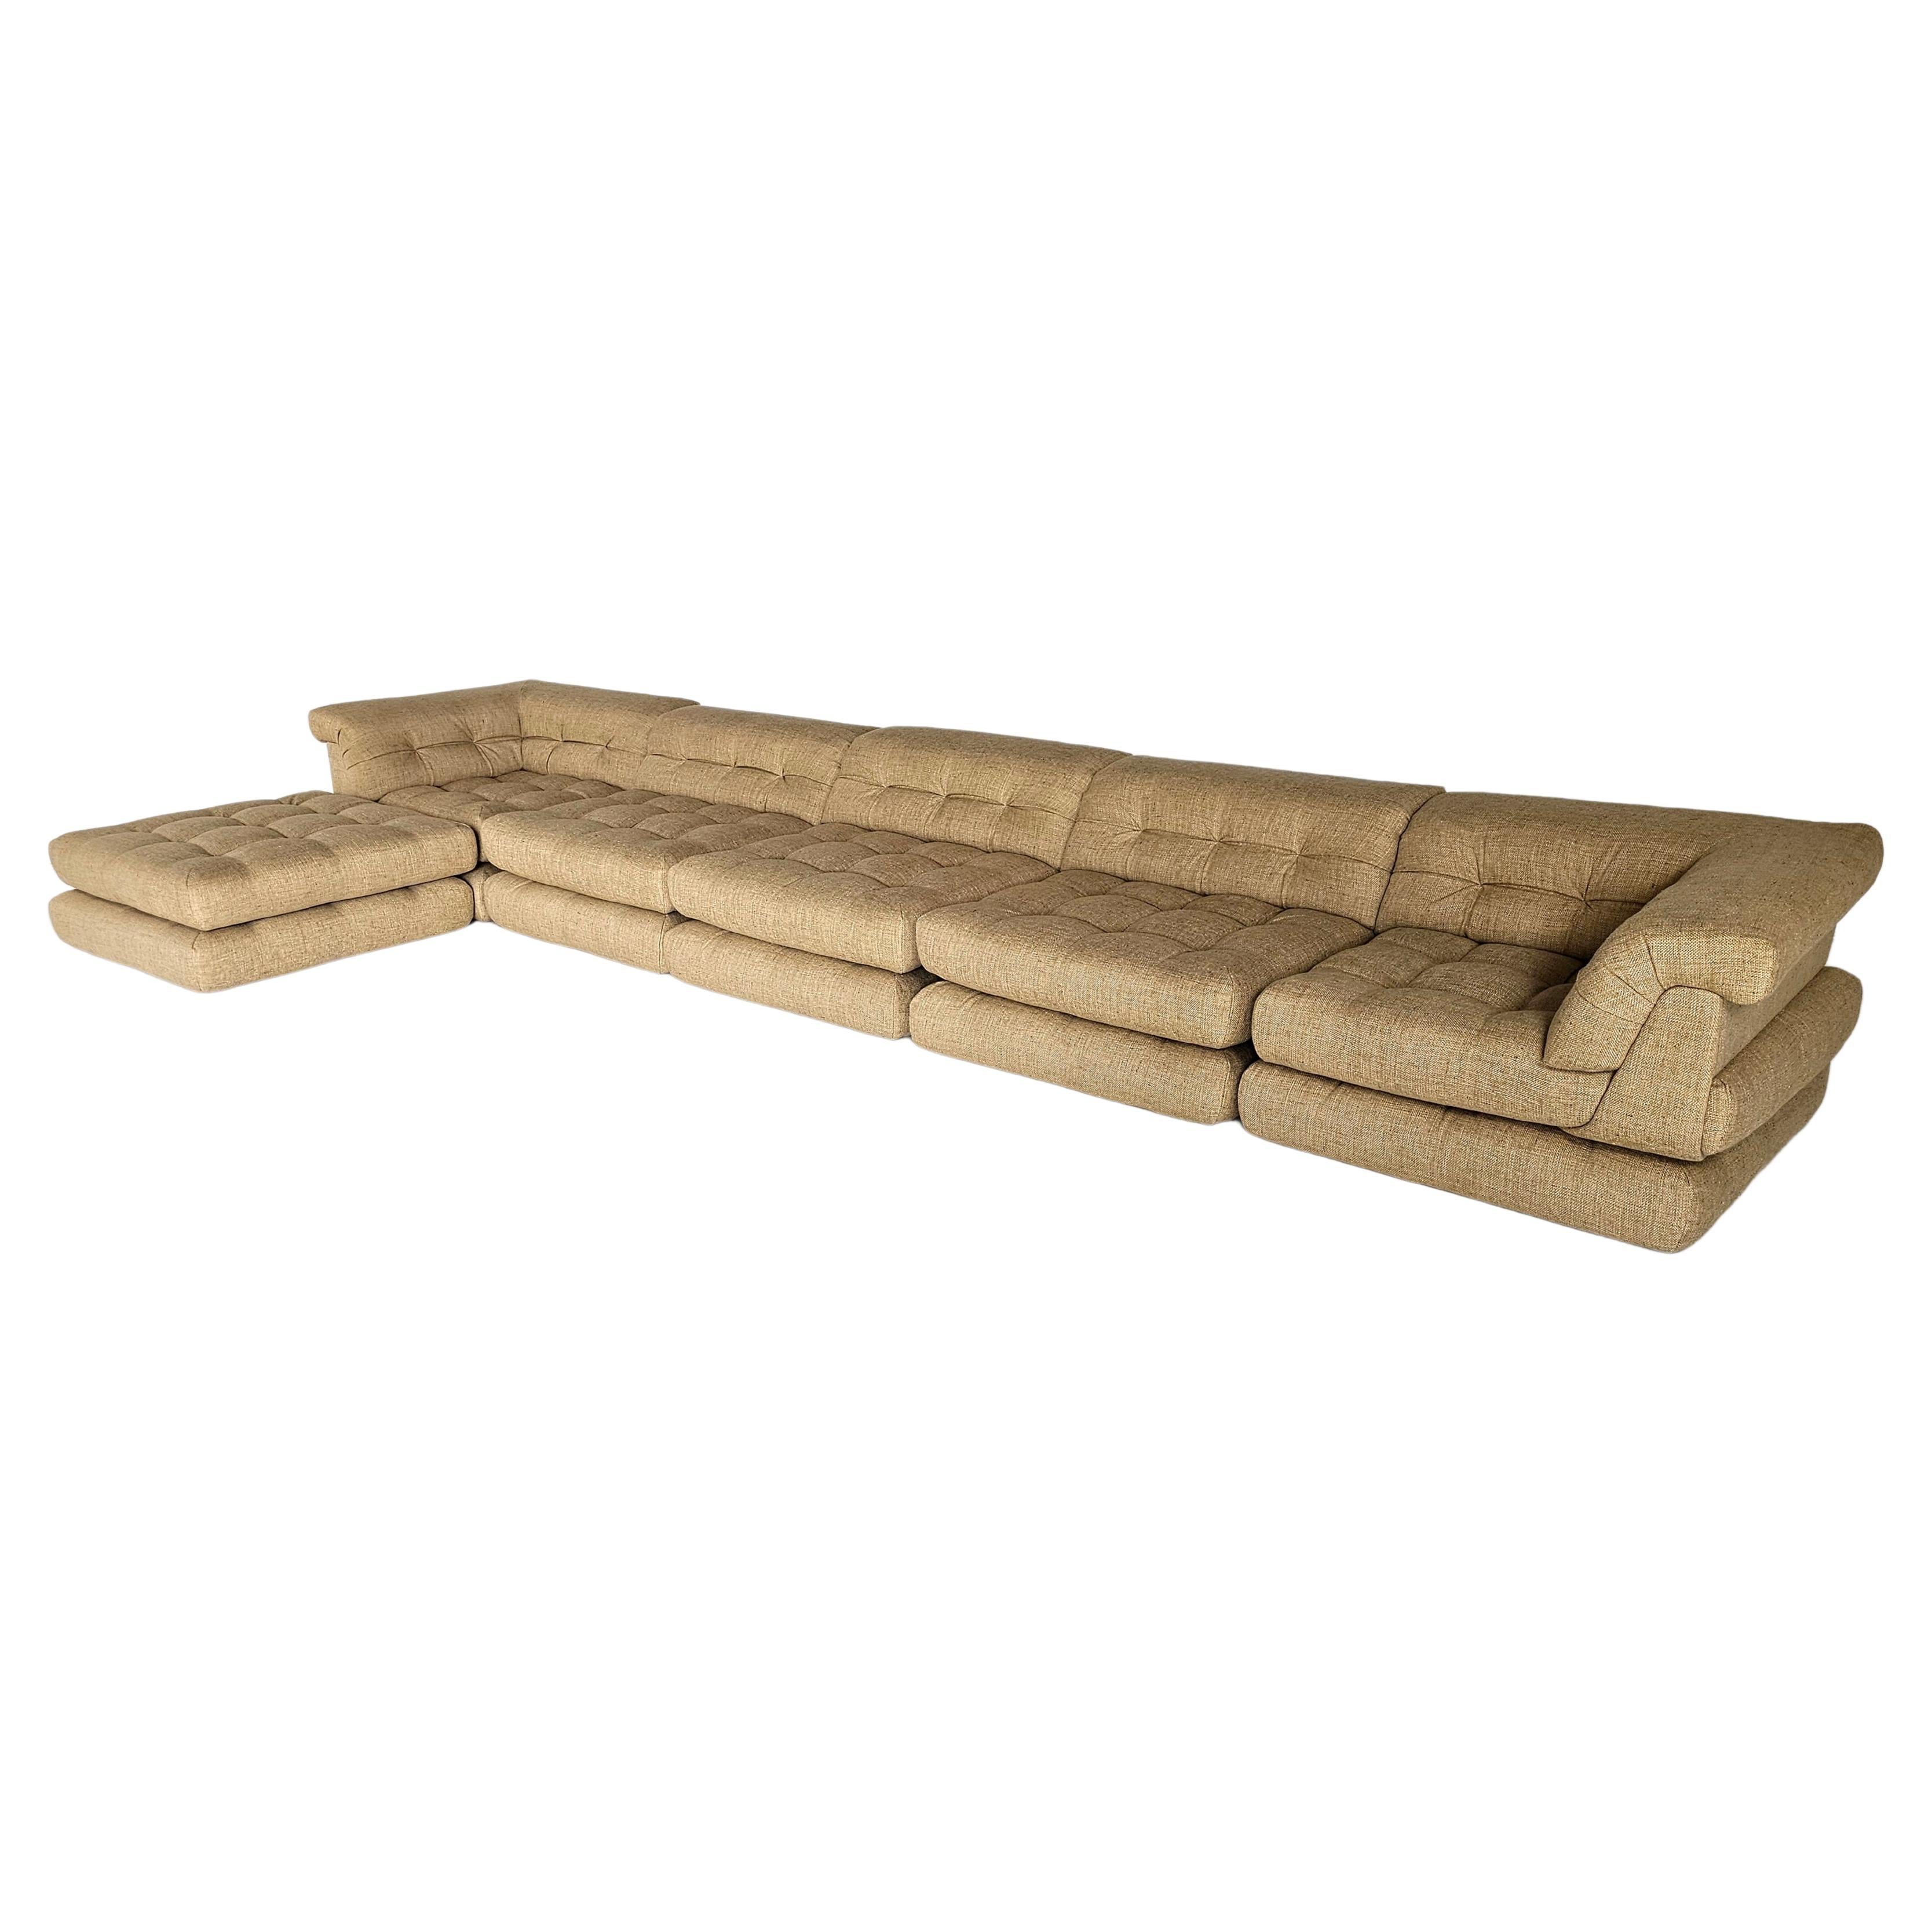 Roche Bobois Mah Jong sofa,  beige/sand fabric, Pierre Frey Ankor fabric.

1st edition reupholstered Mah Jong modular sofa set by Hans Hopfer, designed in 1971 for Roche Bobois. It features multiple cushions that can be arranged in an endless number